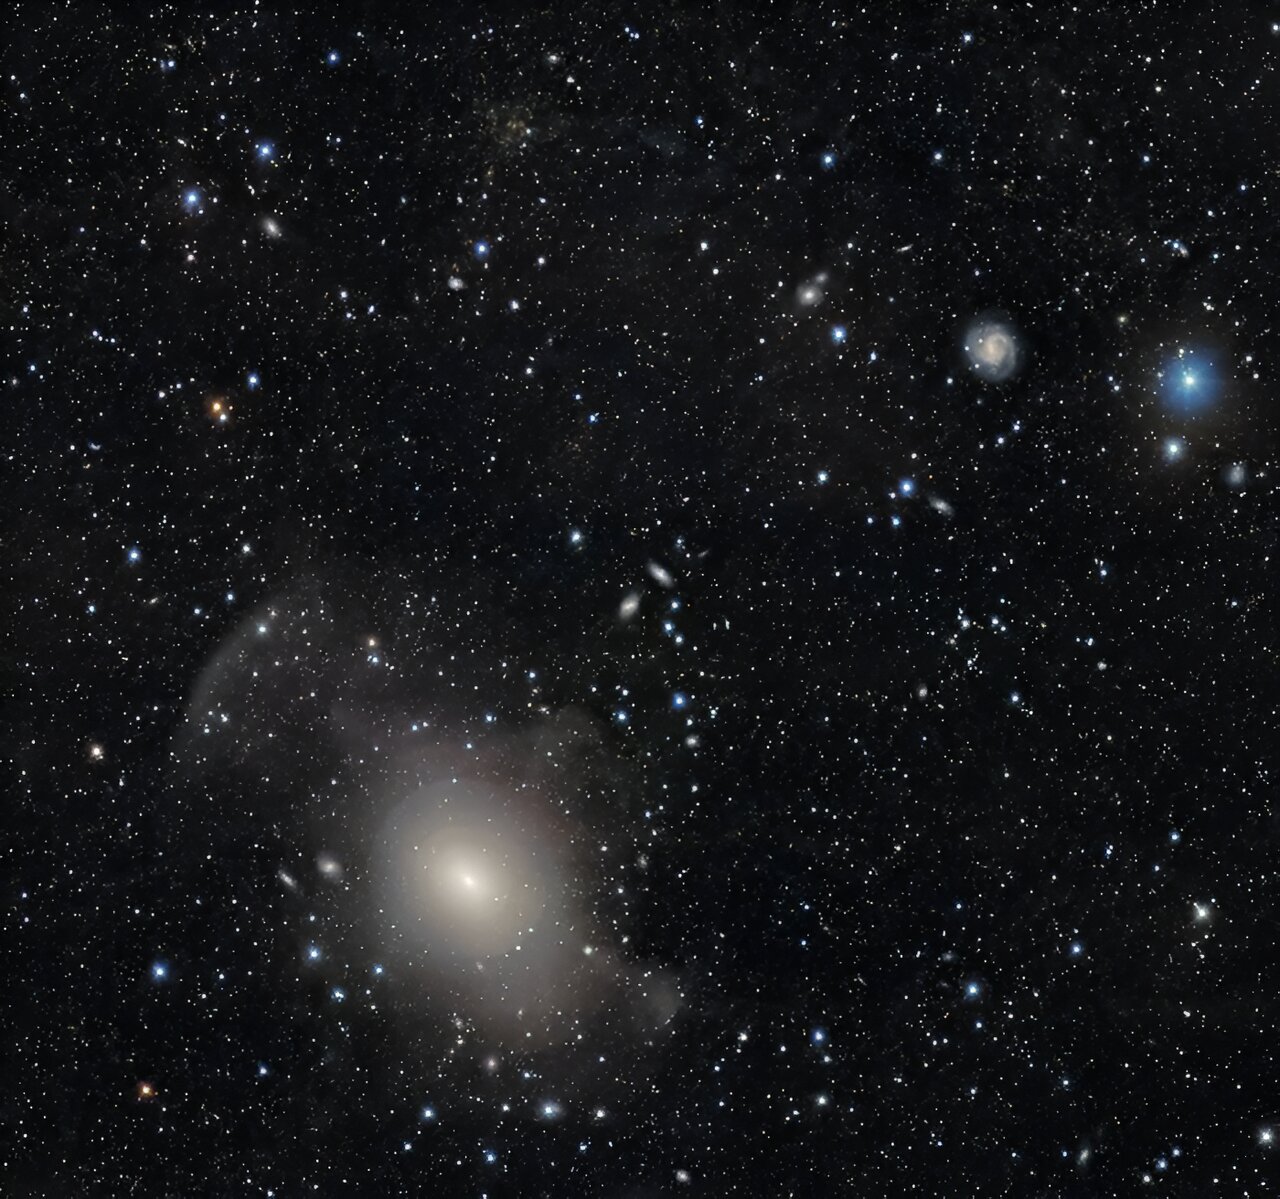 DECam captures the stunning layers of shell galaxy NGC 3923 and nearby gravitational lensing